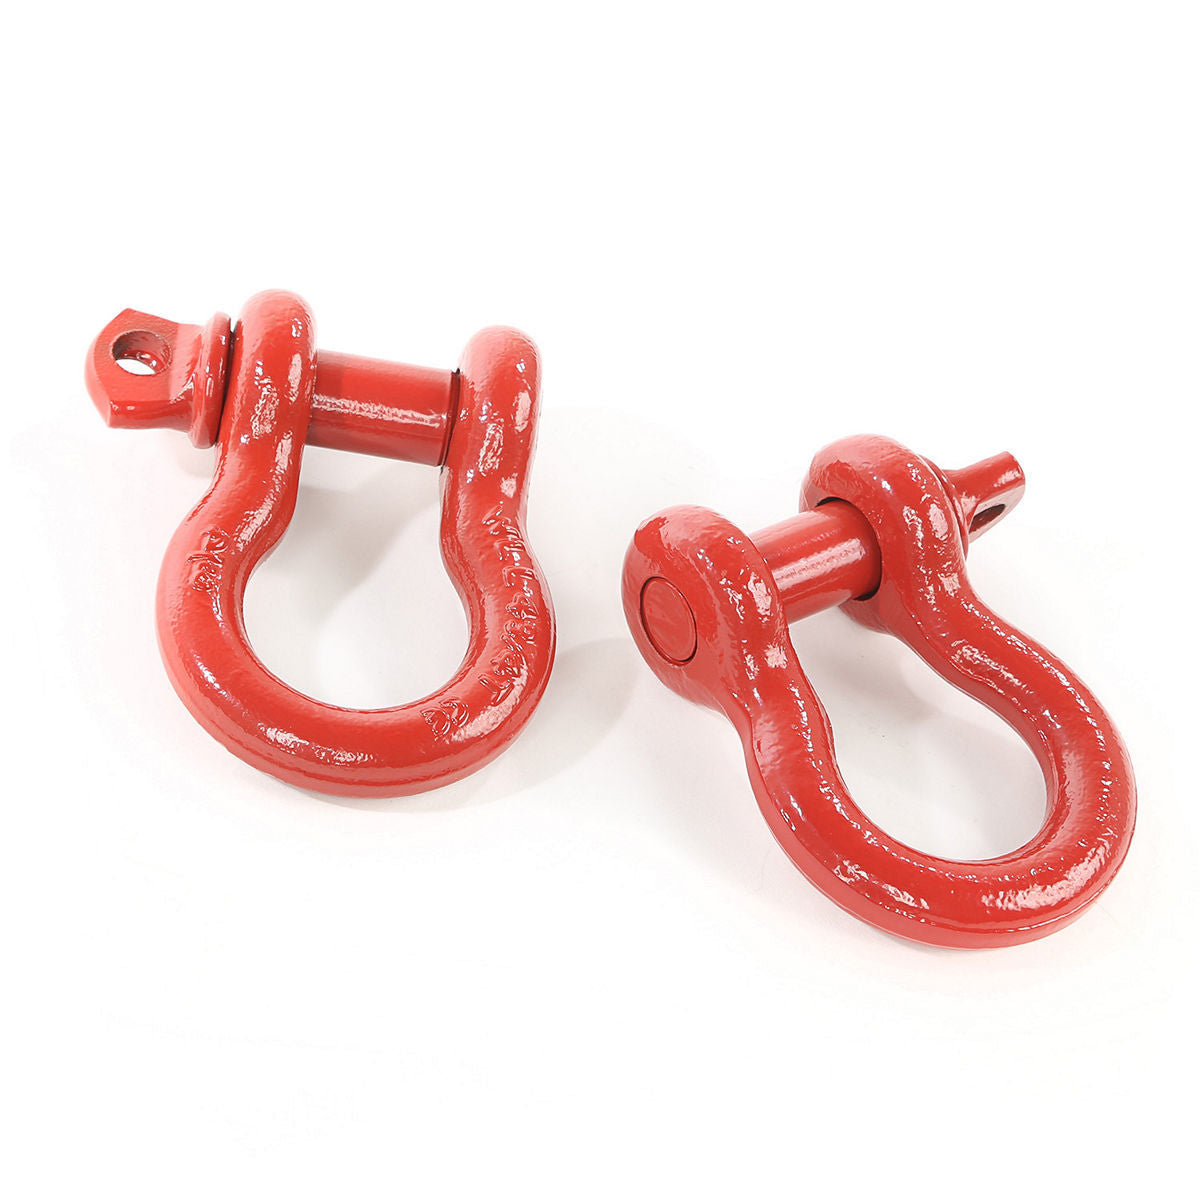 D-Ring Shackles  3/4-Inc h  Red  Steel  Pair